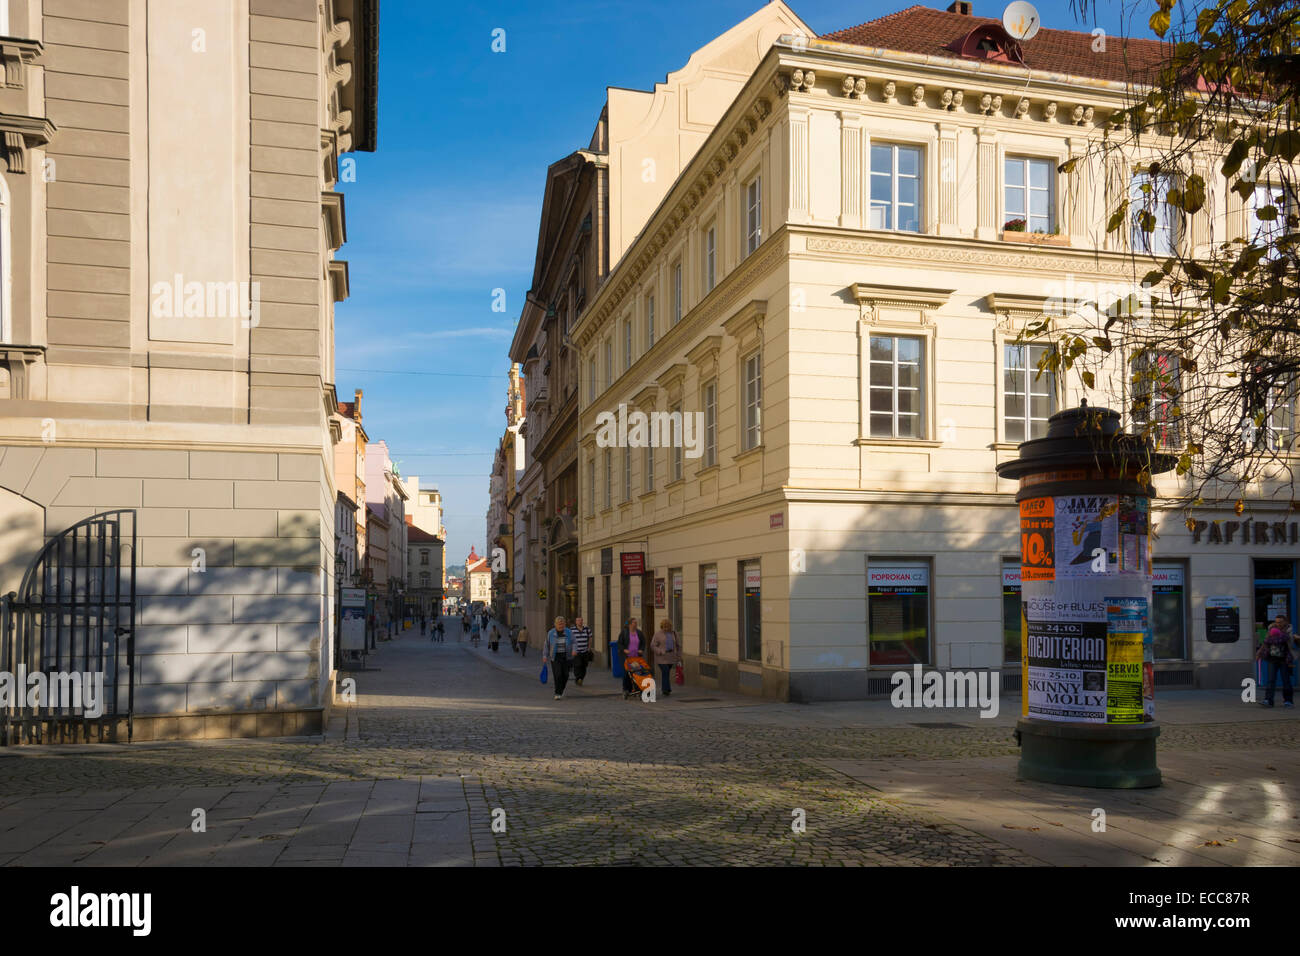 Plzeň or Pilsen, the European Capital of Culture 2015 and the home of Pilsner beer, in Western Bohemia in the Czech Republic, Stock Photo